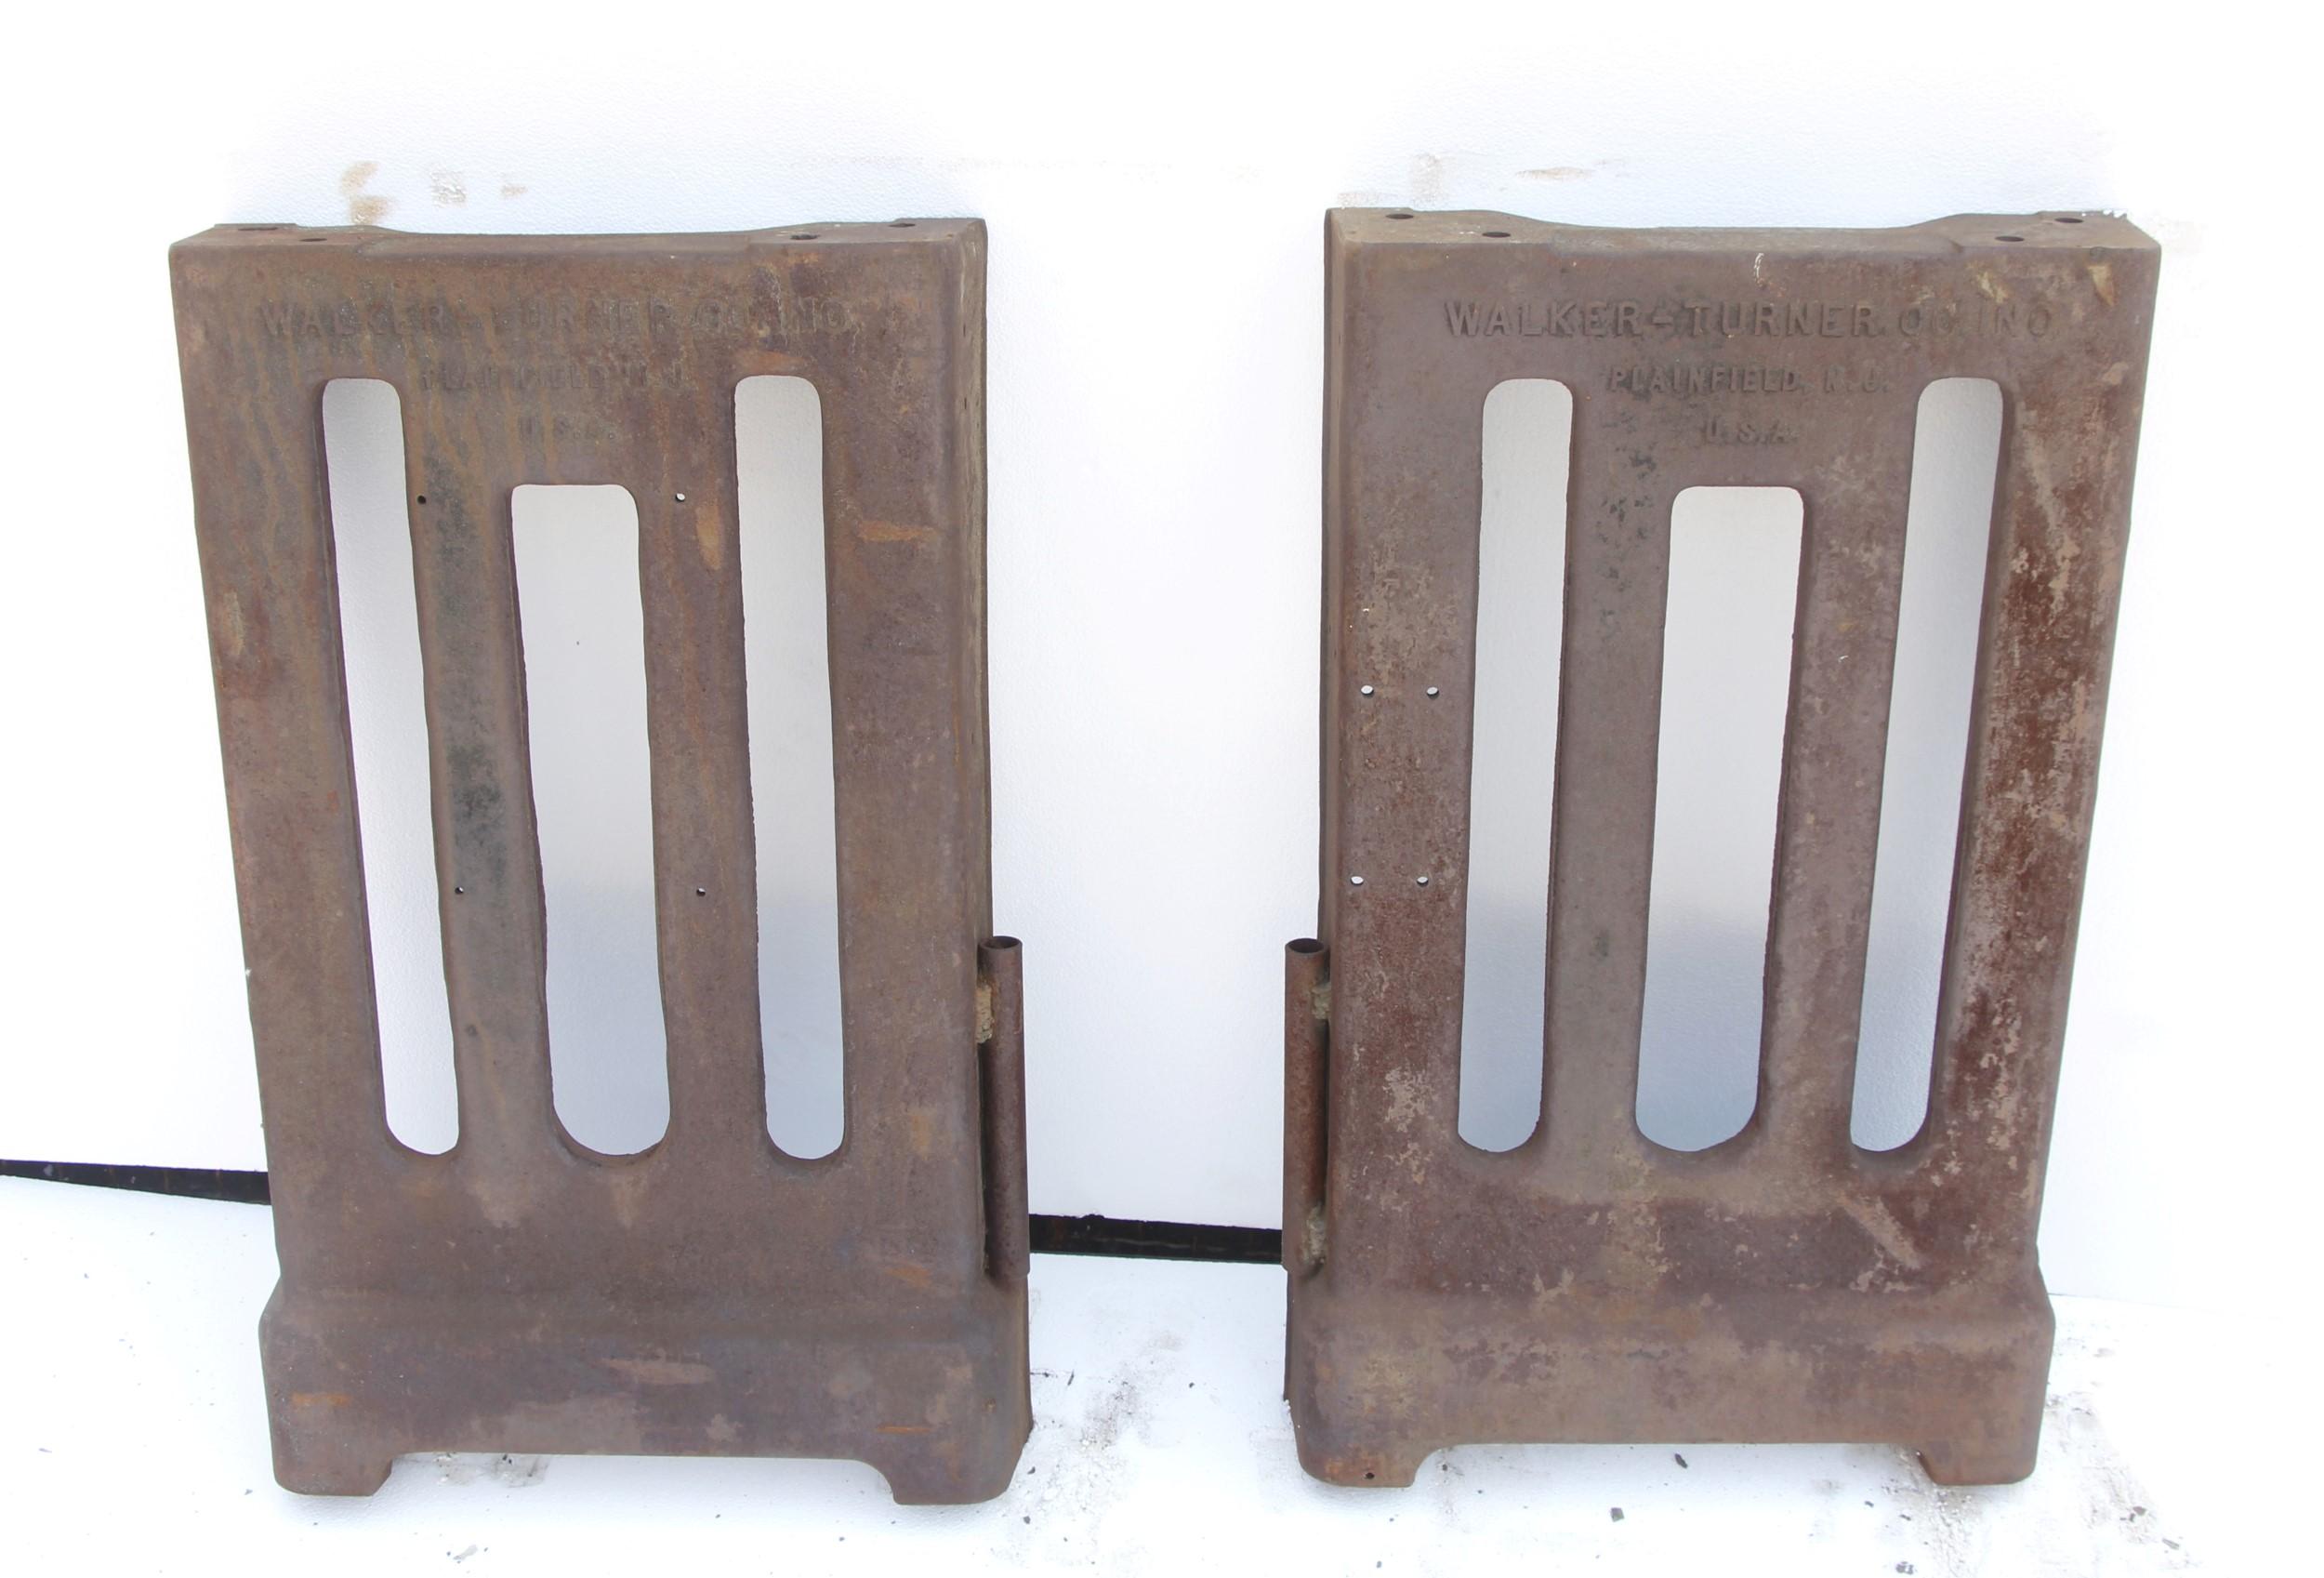 This pair of antique heavy cast iron machine legs were made by The Walker Turner Co. (the name is embossed). The Walker Turner Co. established its headquarters in Plainfield, NJ in 1931 after moving from Jersey City, NJ. During this time they made